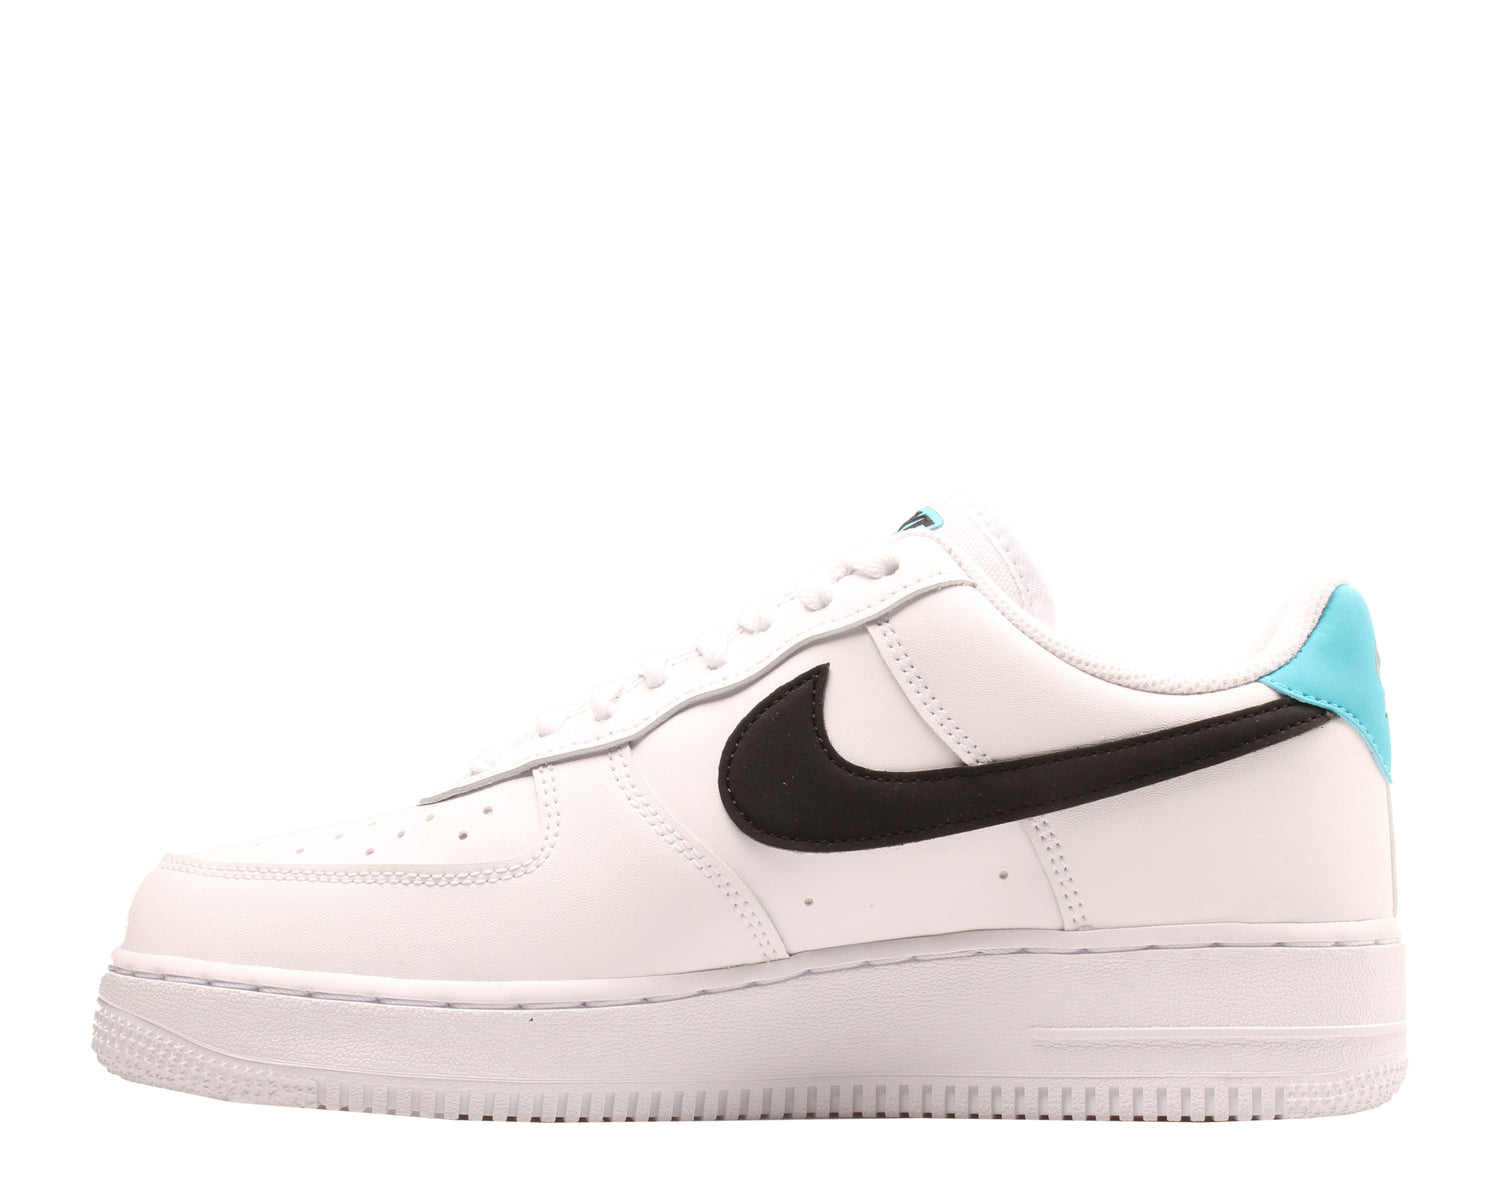 Nike Air Force 1 '07 WW Men's Basketball Shoes